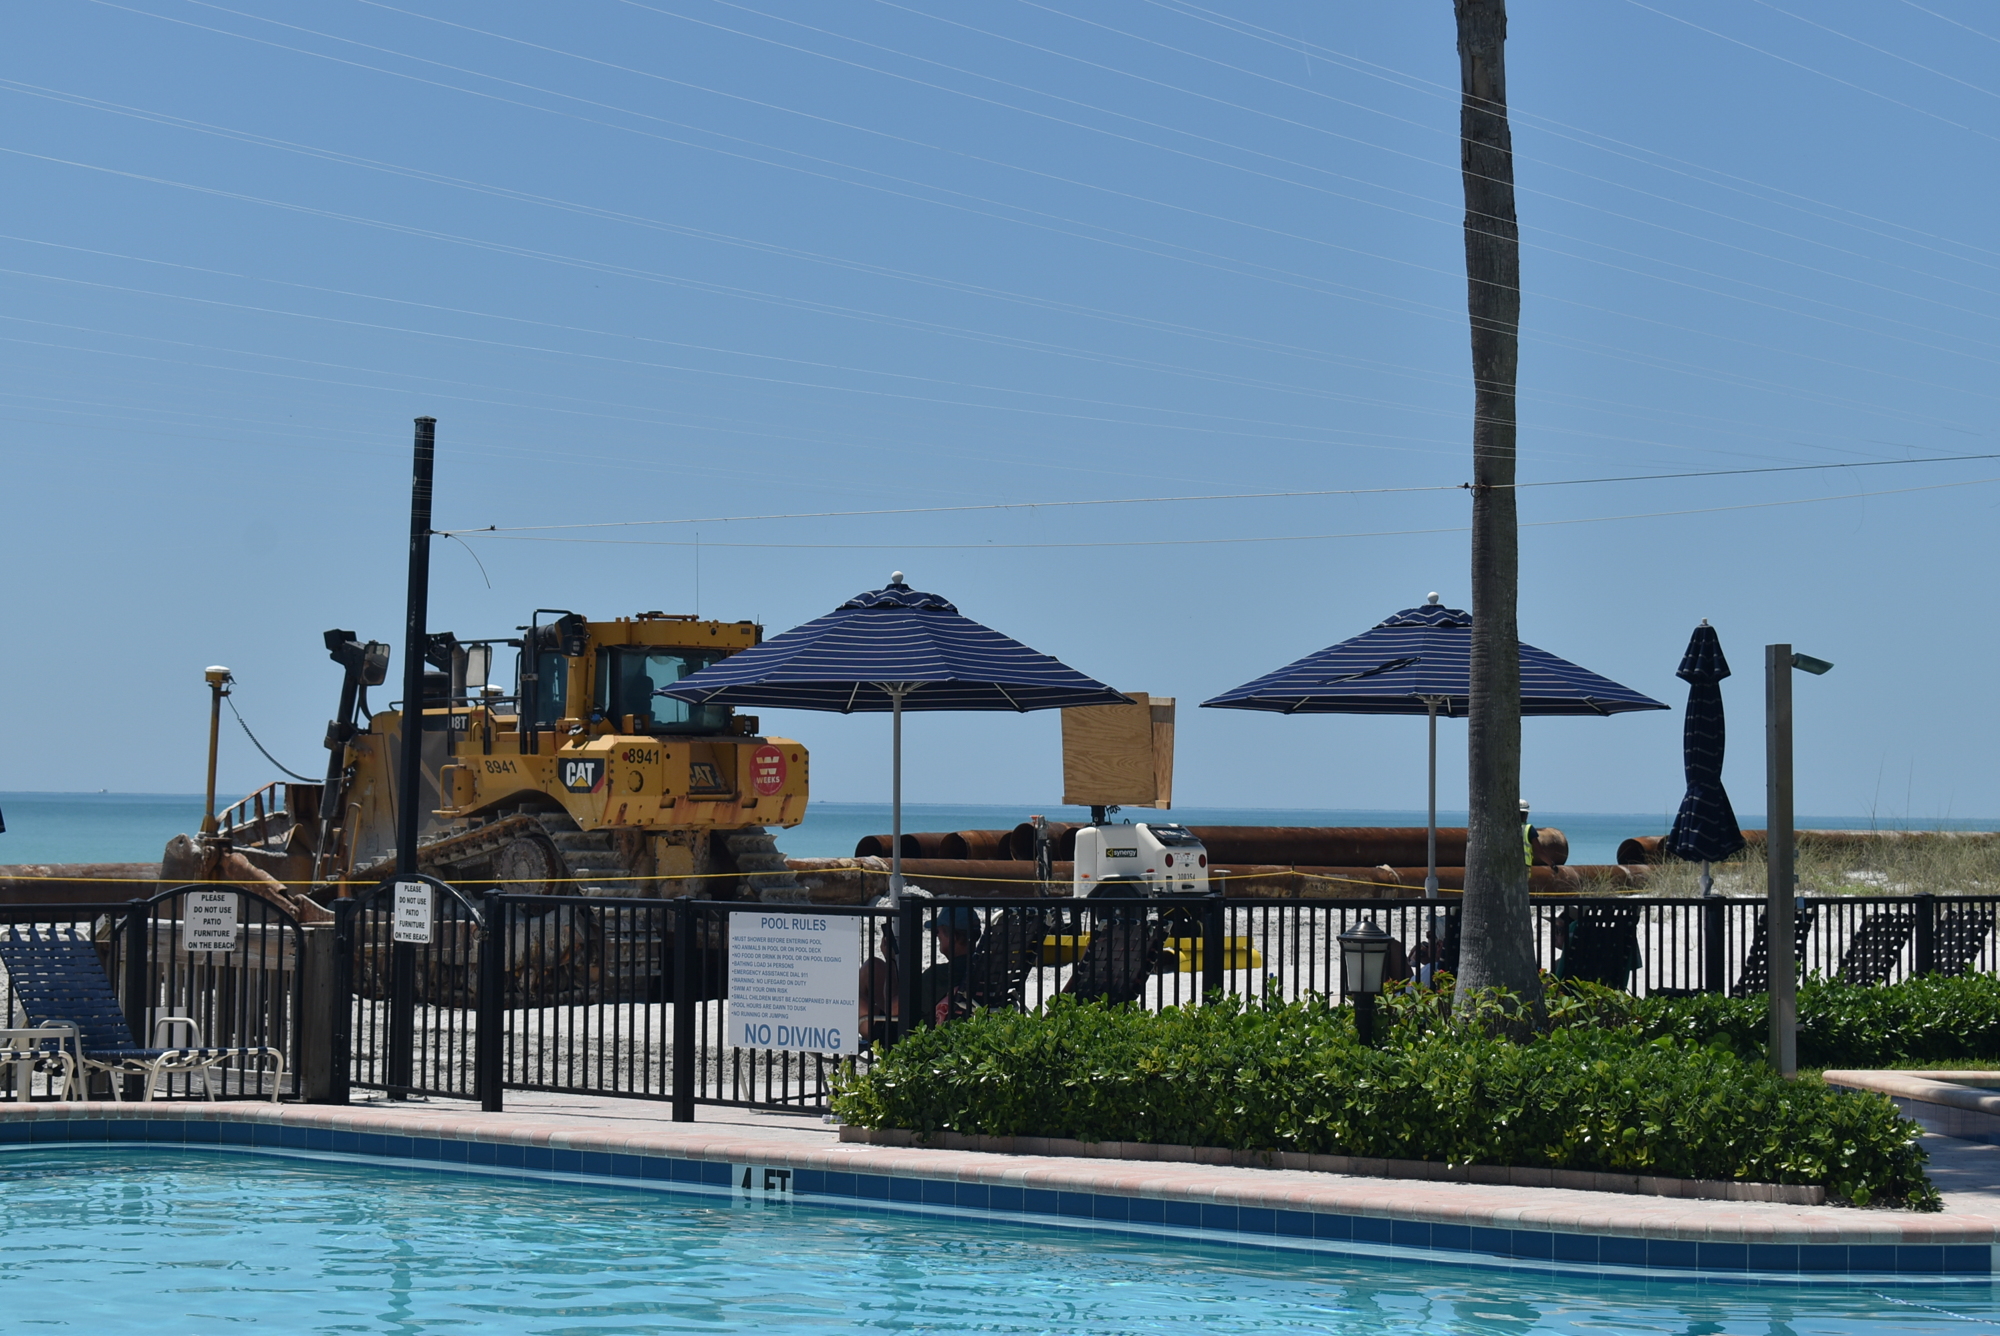 At Islands West, construction vehicles provide a different background than the typical gulf view.